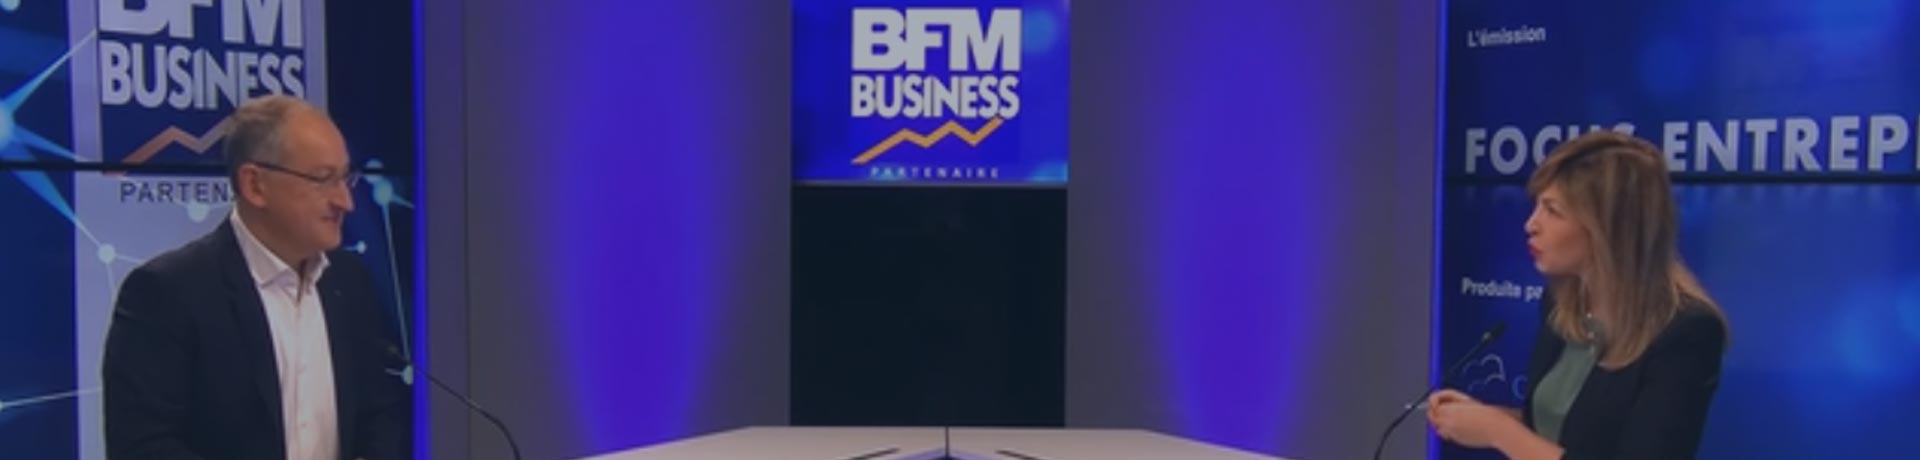 BFM Business TV show with Philippe Maillard and Eleonore Boccara